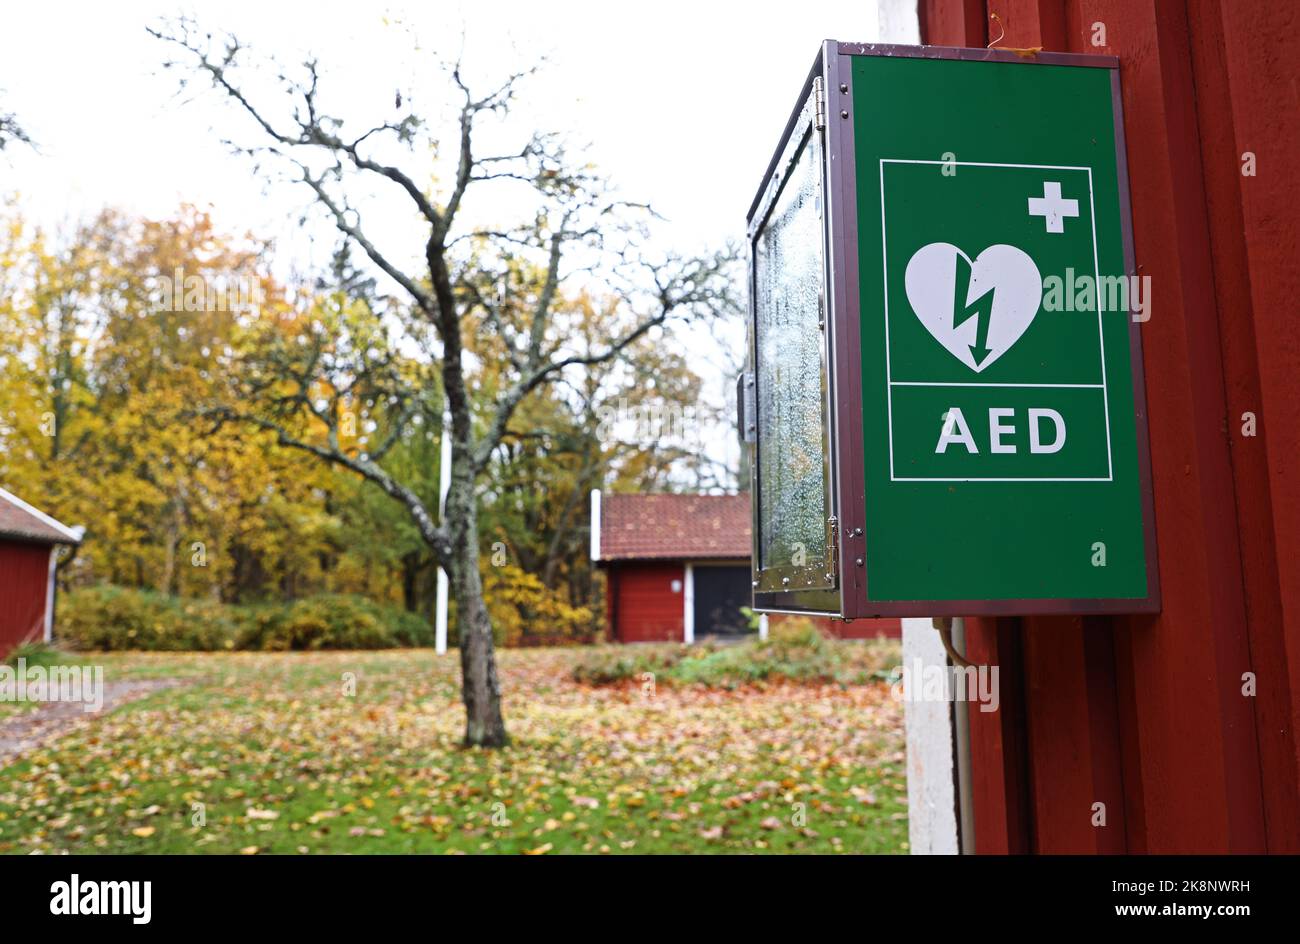 An Automated external defibrillator in a park. An automated external defibrillator (AED) is a portable electronic device that automatically diagnoses the life-threatening cardiac arrhythmias of ventricular fibrillation (VF) and pulseless ventricular tachycardia. Stock Photo